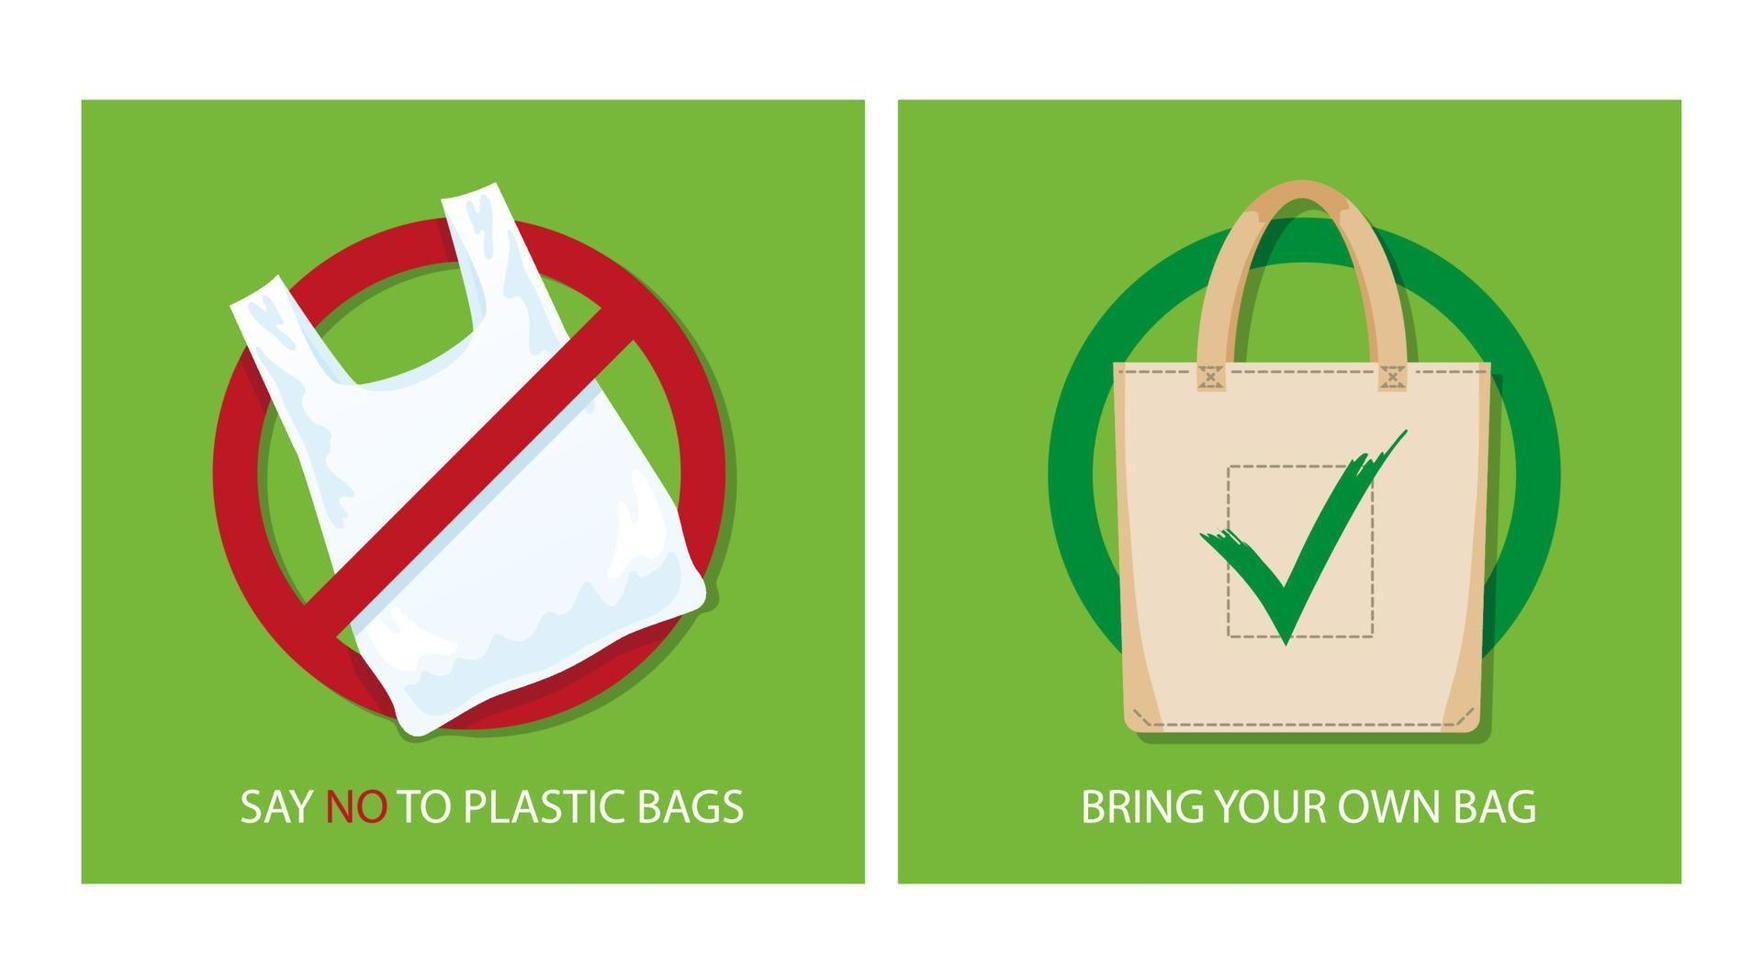 Pollution problem concept. Say no to plastic bags, bring your own textile bag. Cartoon styled images with signage calling for stop using disposable polythene package. Vector illustration.